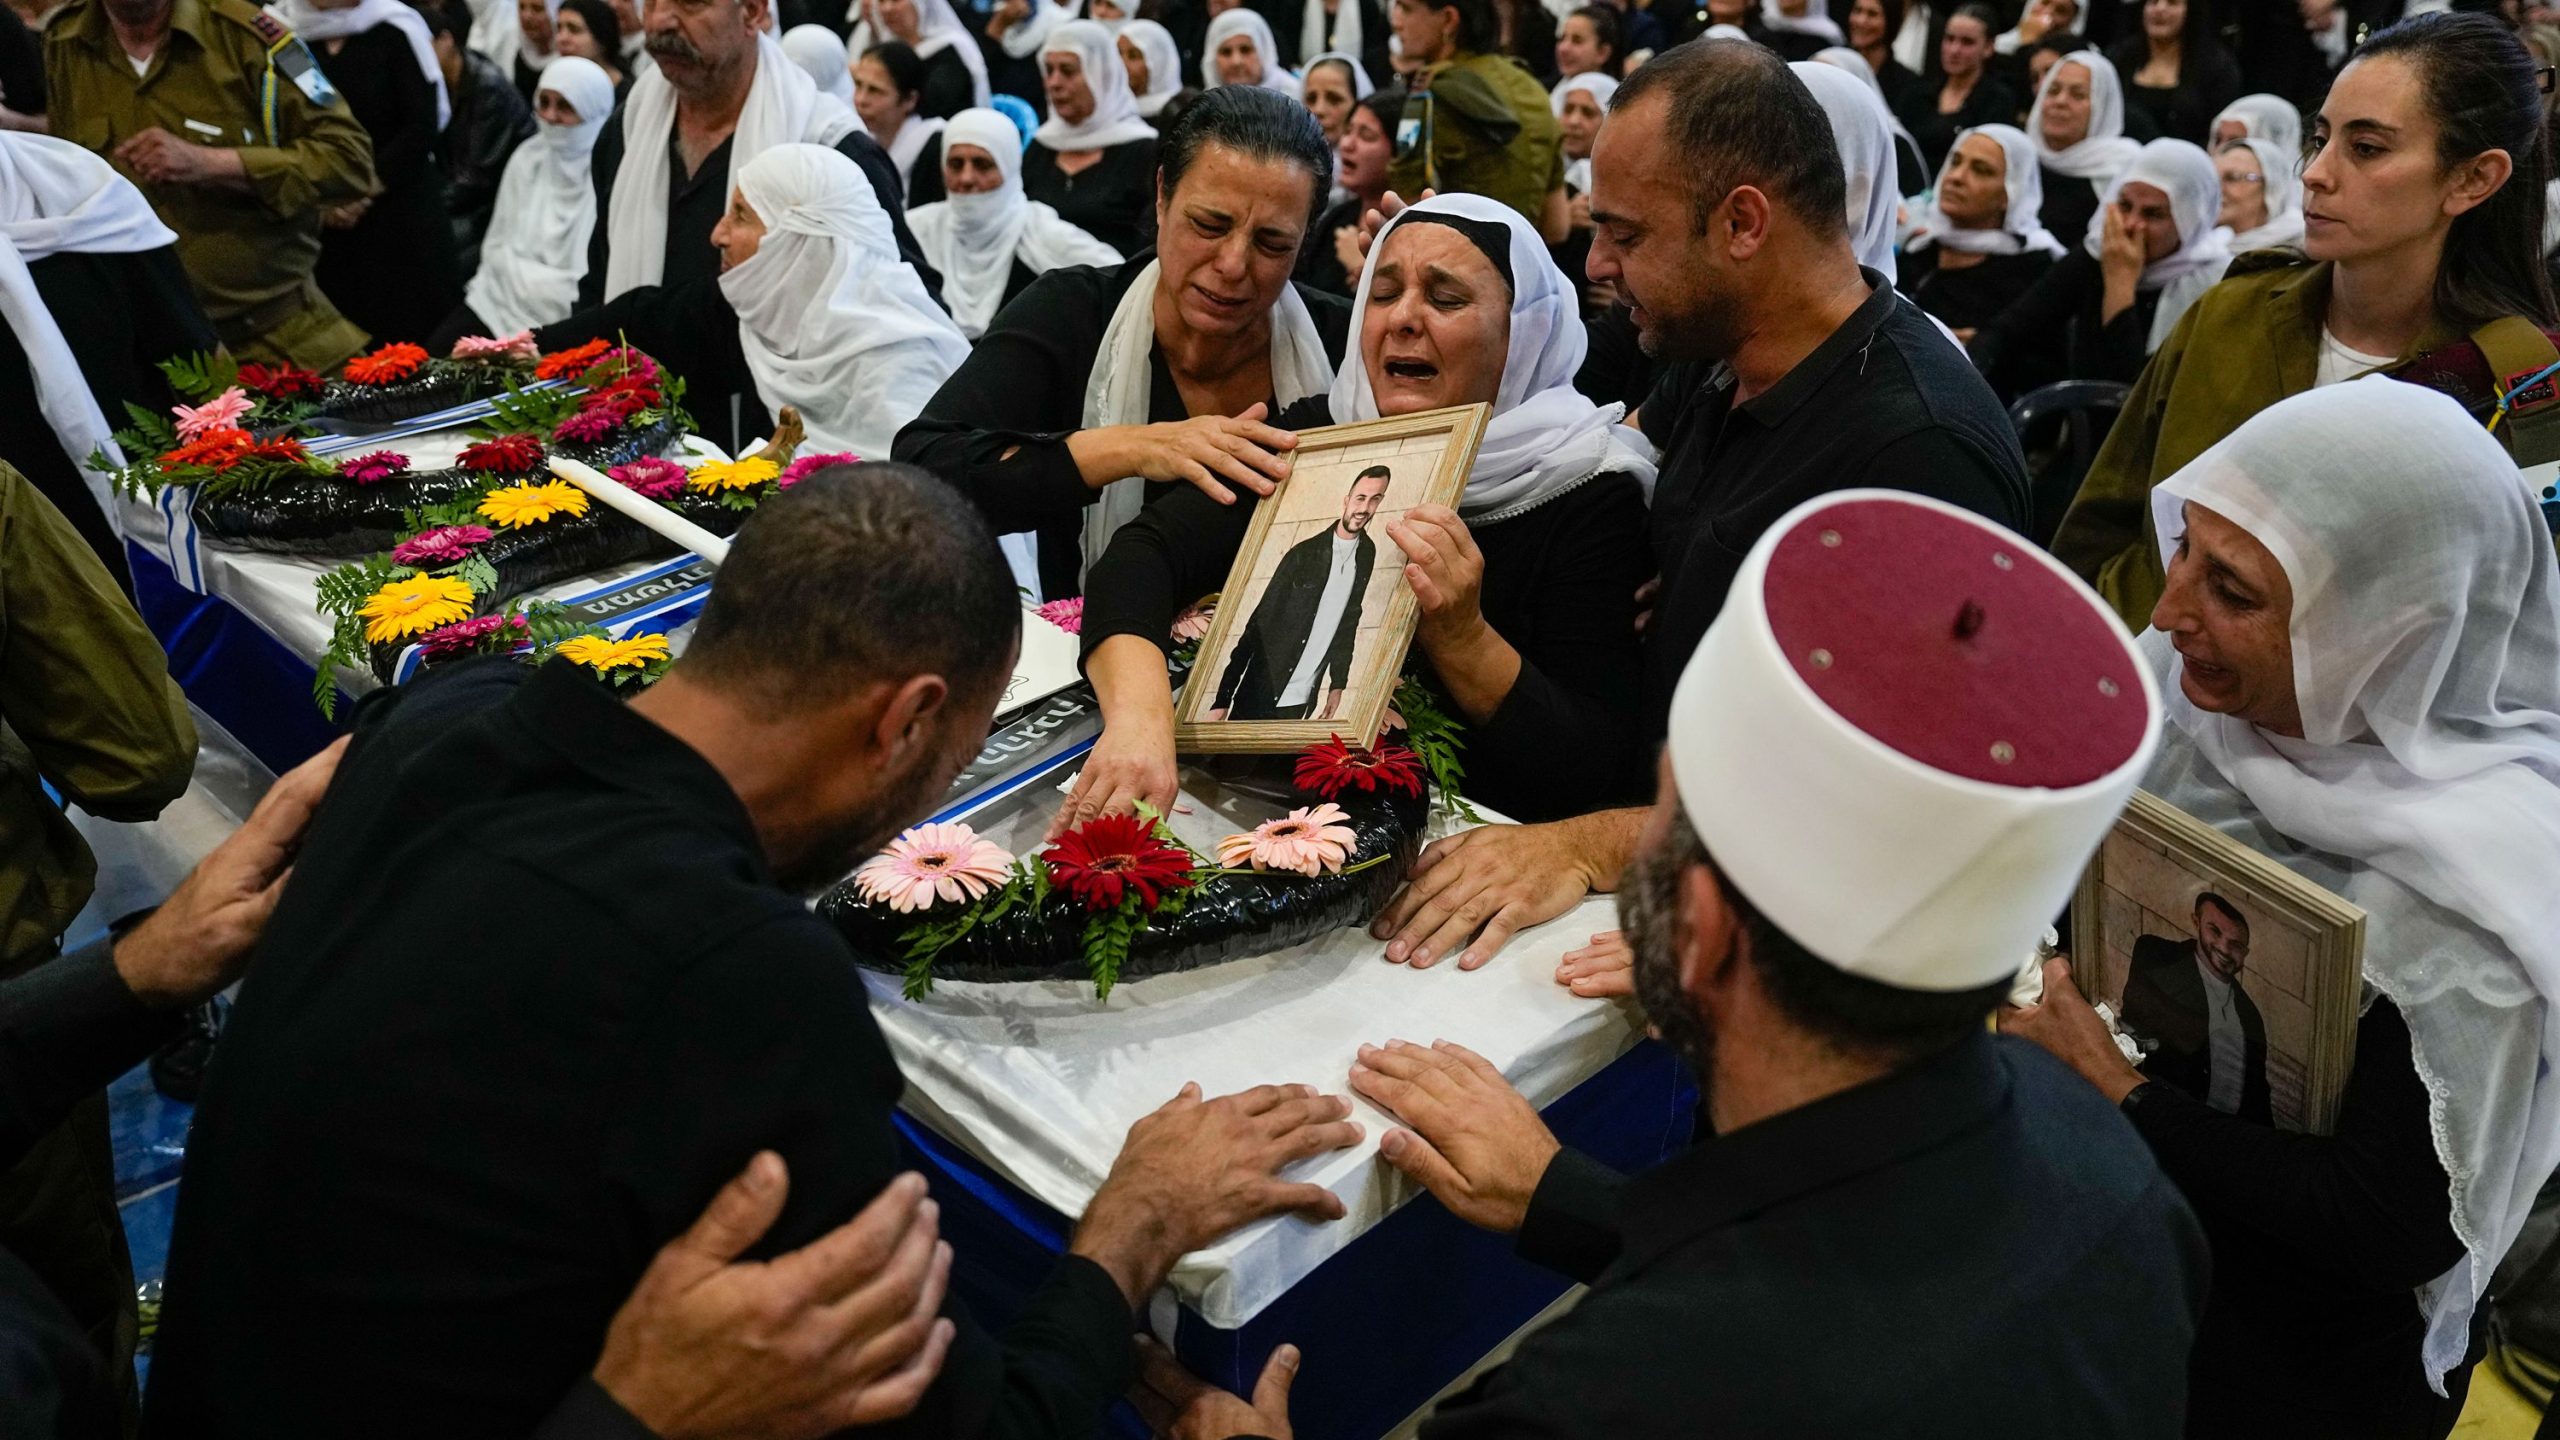 Amidst grief, the Druze community advocates for equality and recognition (Credits: CNN)